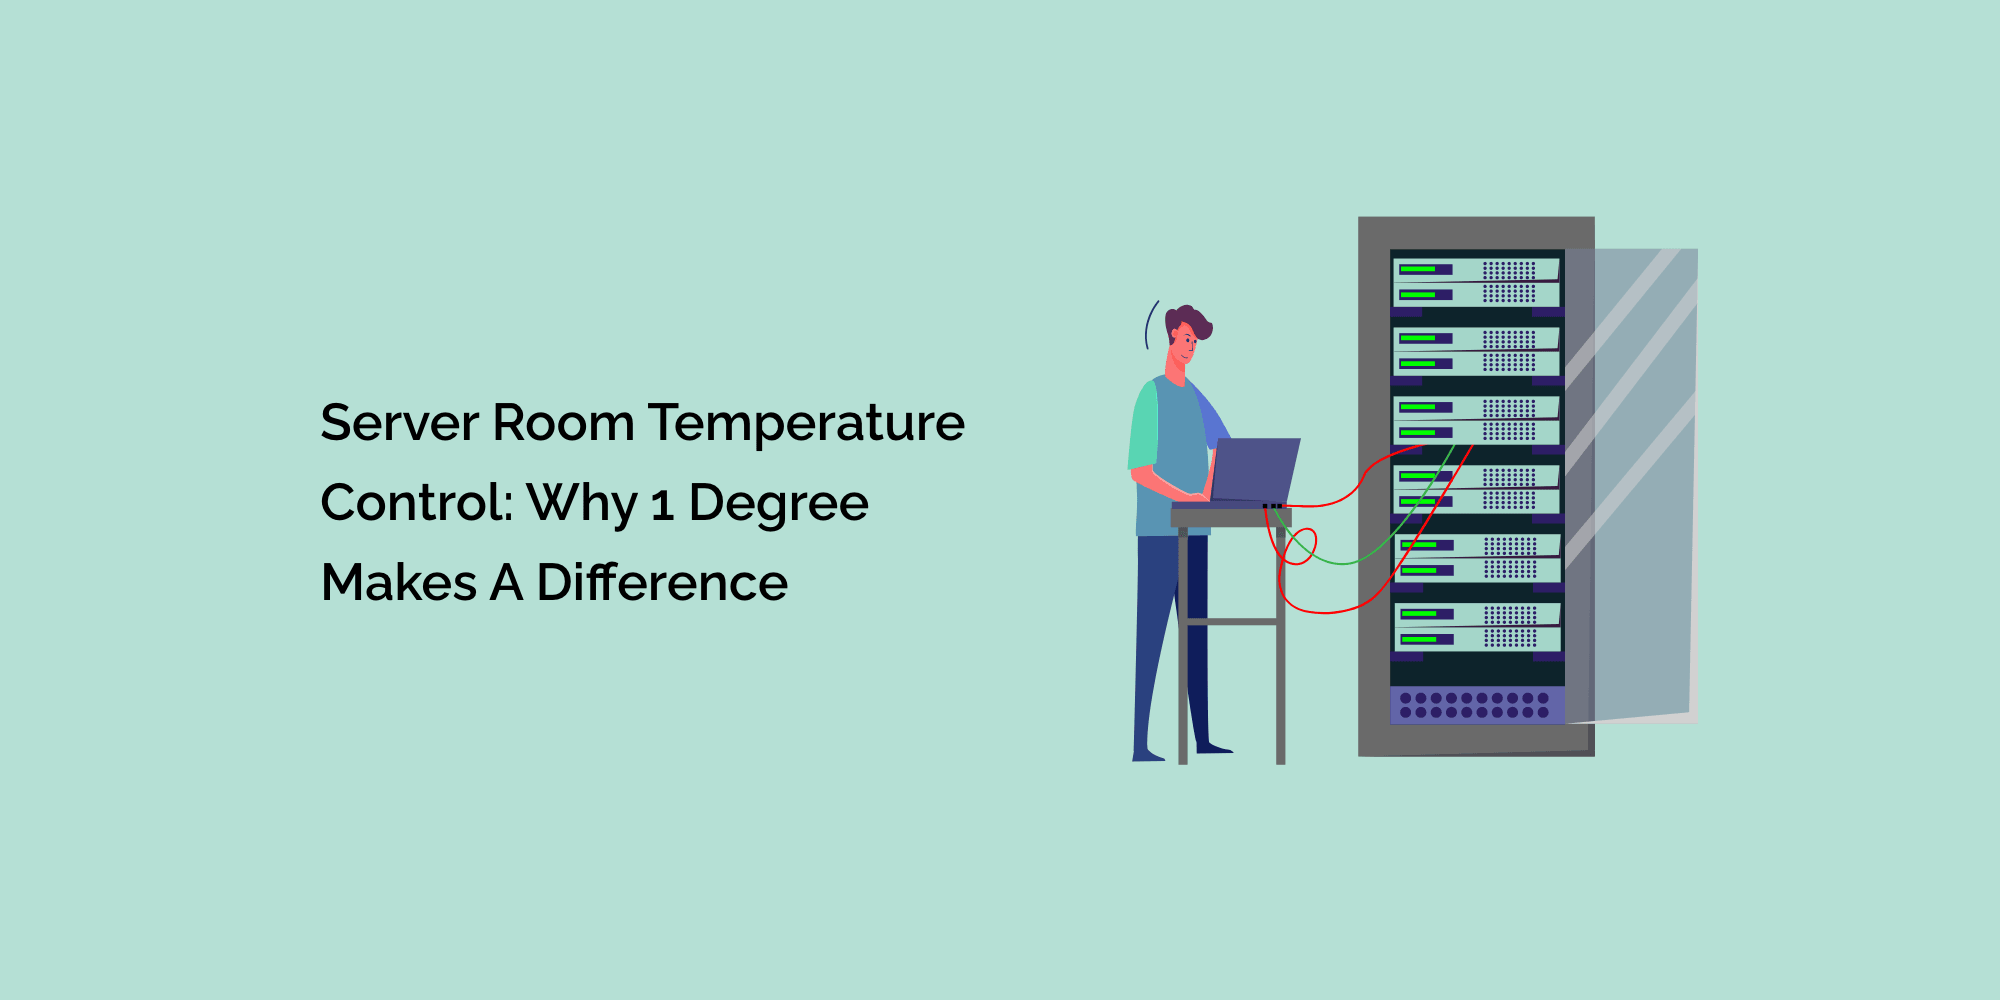 Server Room Temperature Control: Why 1 Degree Makes a Difference